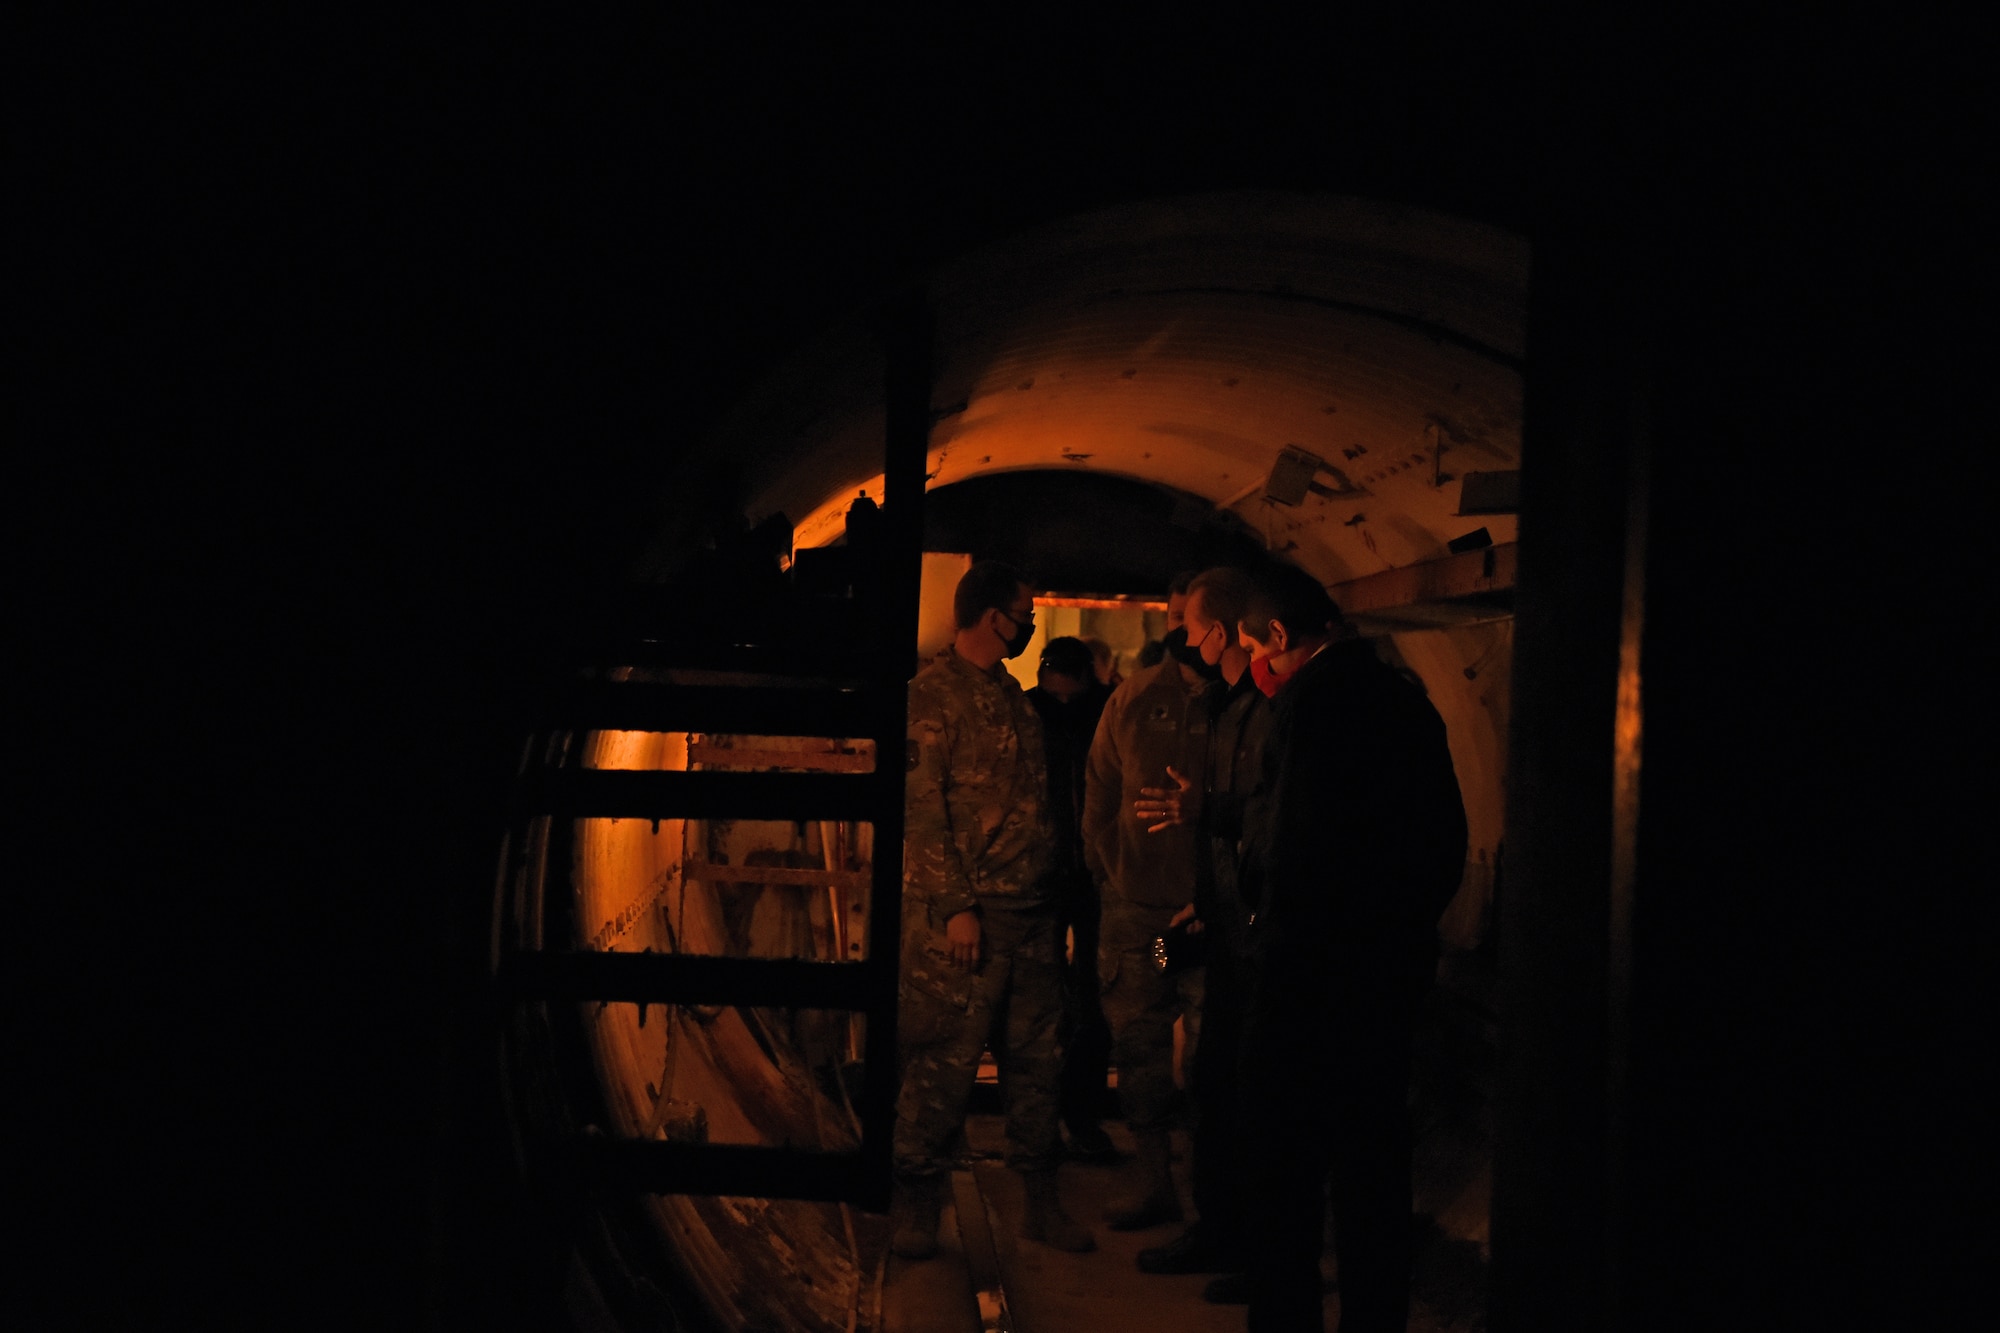 U.S. Air Force members of Goodfellow Air Force Base learn the significance of Lawn Atlas Missile Base’s thick blast doors inside the tunnel on the way to the missile silo in Lawn, Texas, Dec 3, 2020. The underground tunnel connected the main missile silo to a launch control center, which was operated by a five-man crew during the Cold War in 1962. (U.S. Air Force photo by Senior Airman Abbey Rieves)